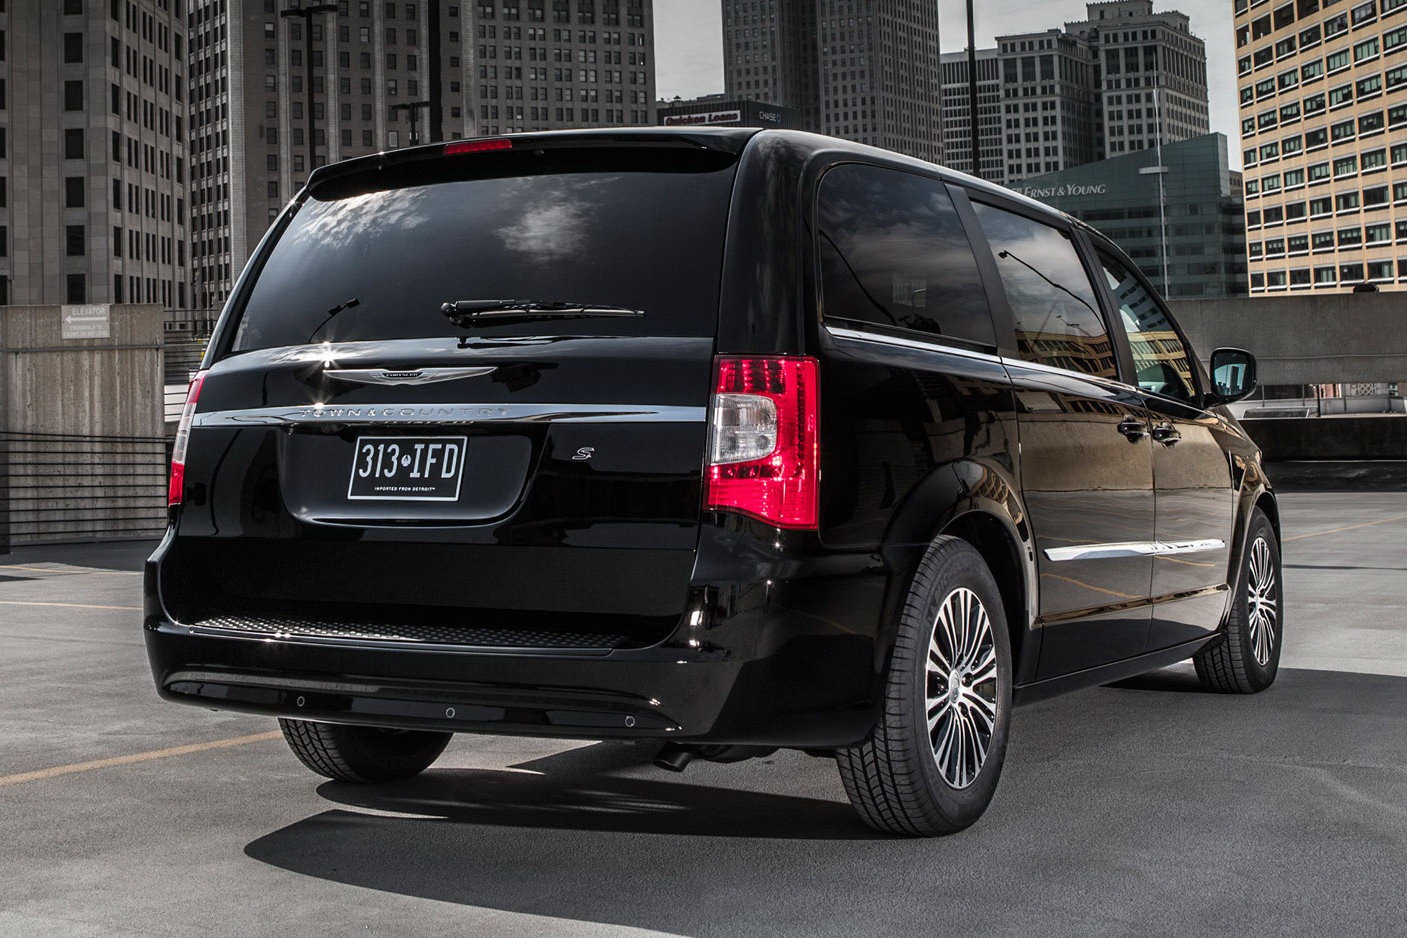 2013 Chrysler Town and Country S Edition